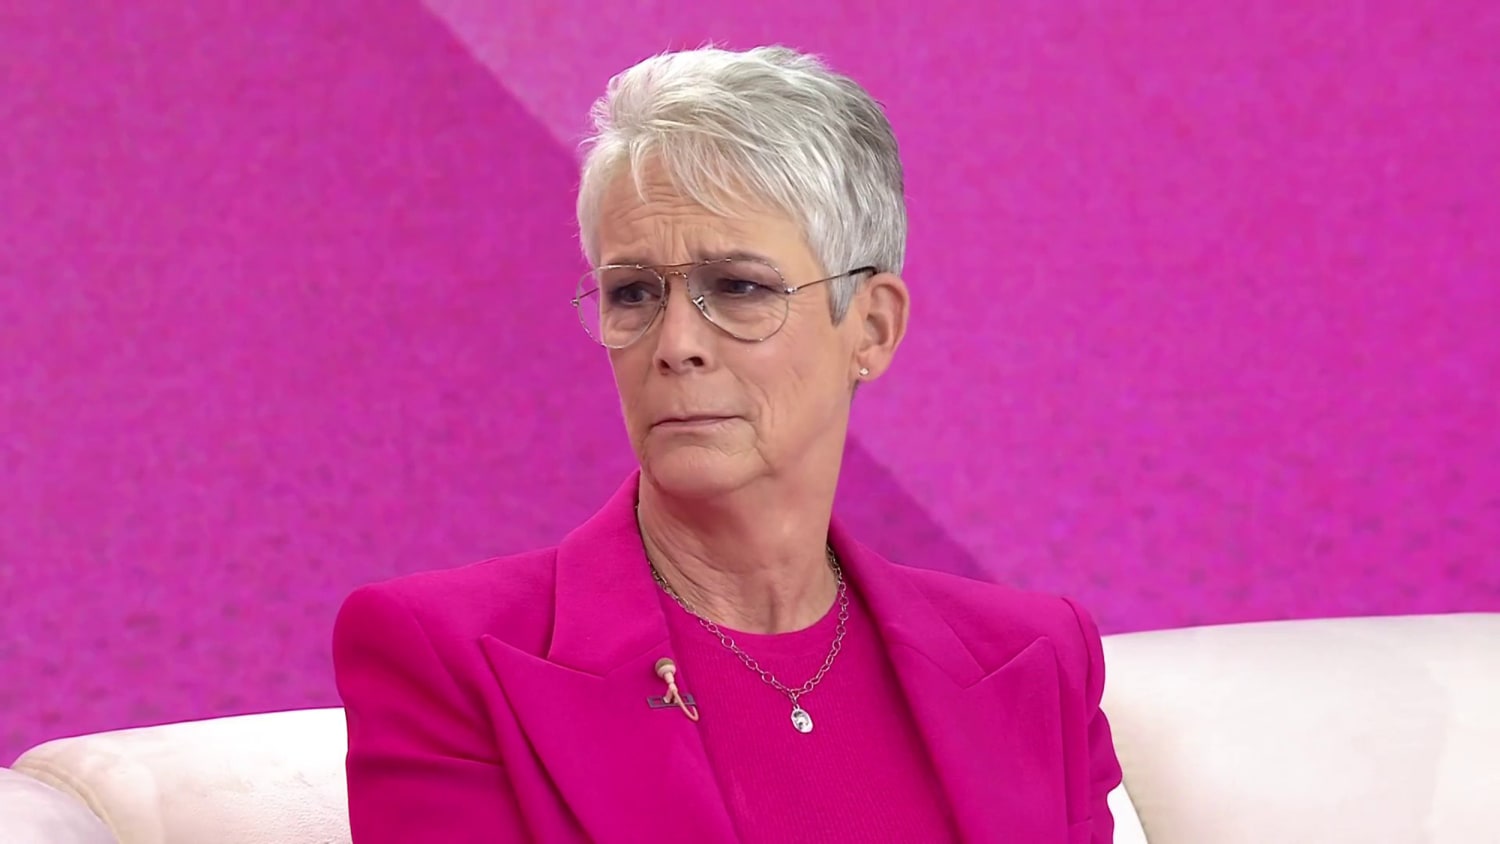 Jamie Lee Curtis Reacts To Kanye West's Antisemitic Social Media Posts:  'Just Abhorrent'